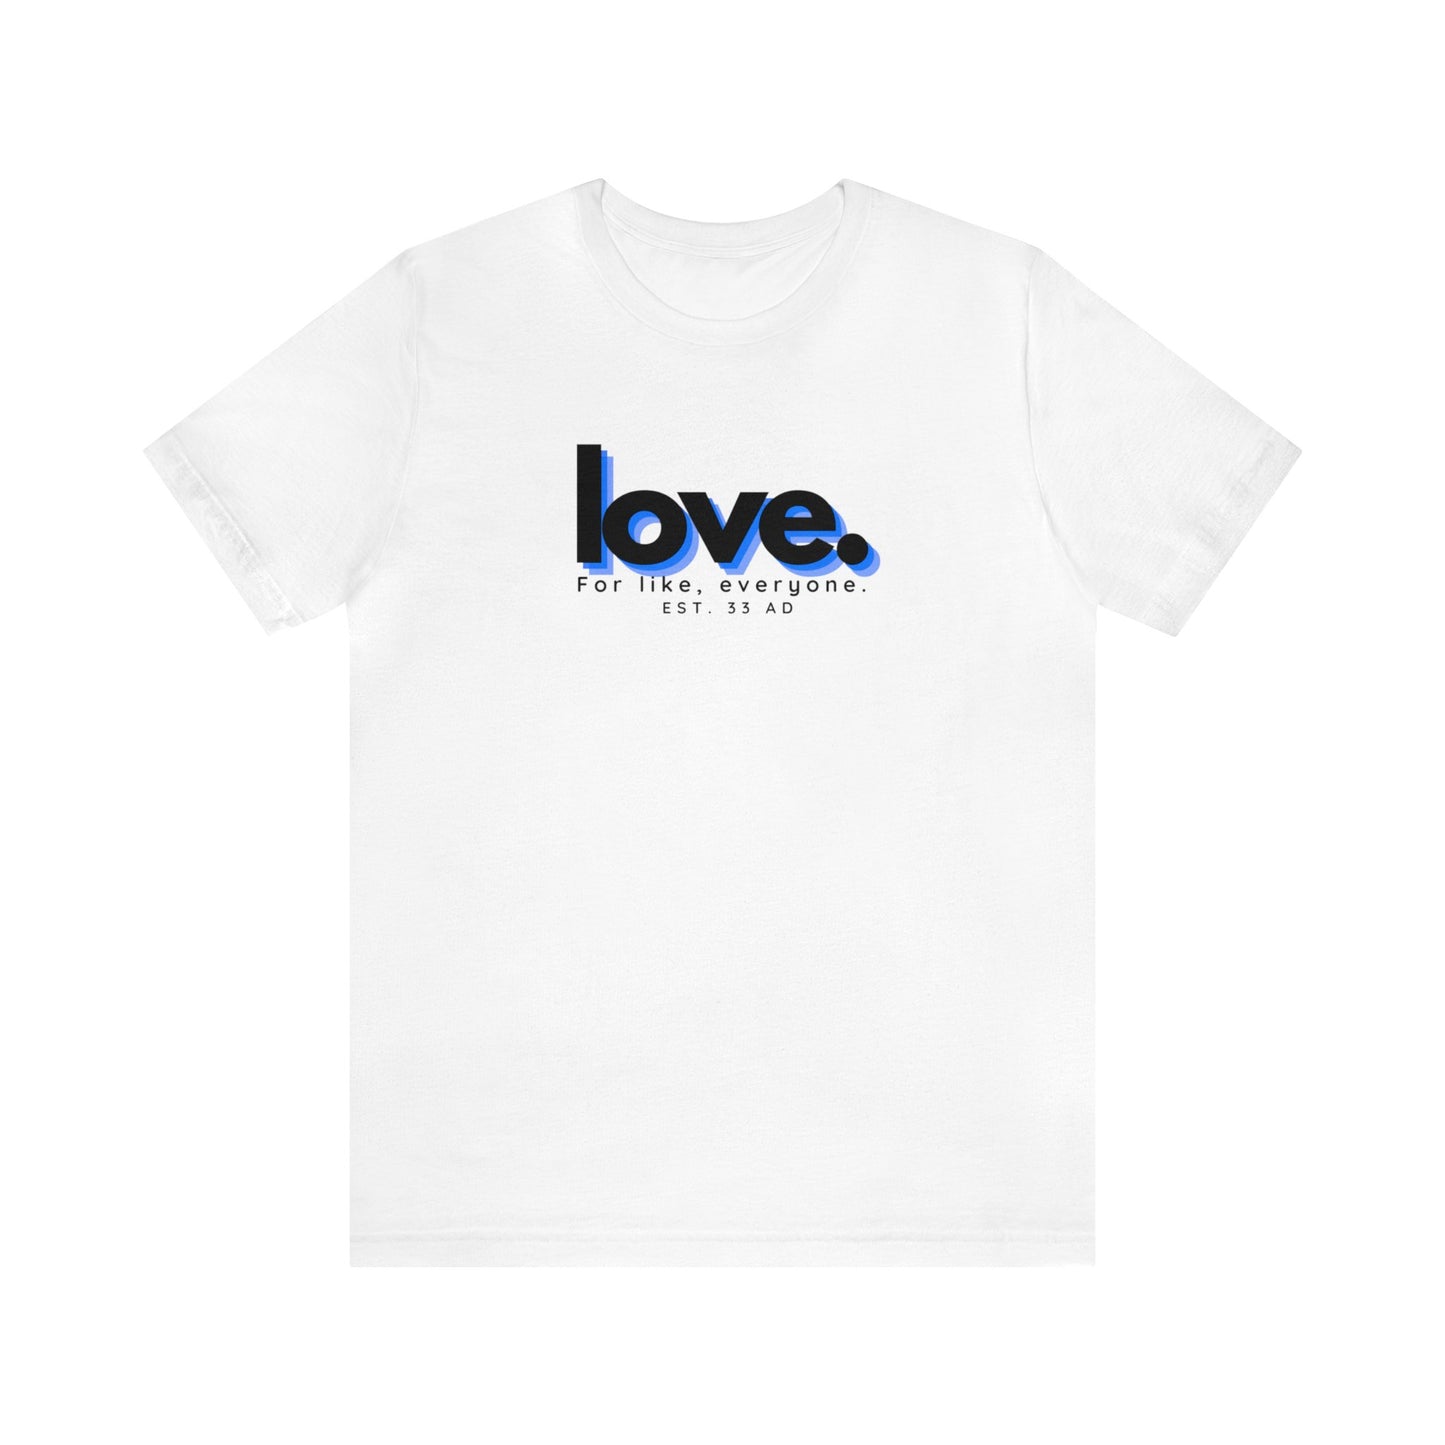 Love for everyone, Express Delivery, Christian T-shirt for Men and Women